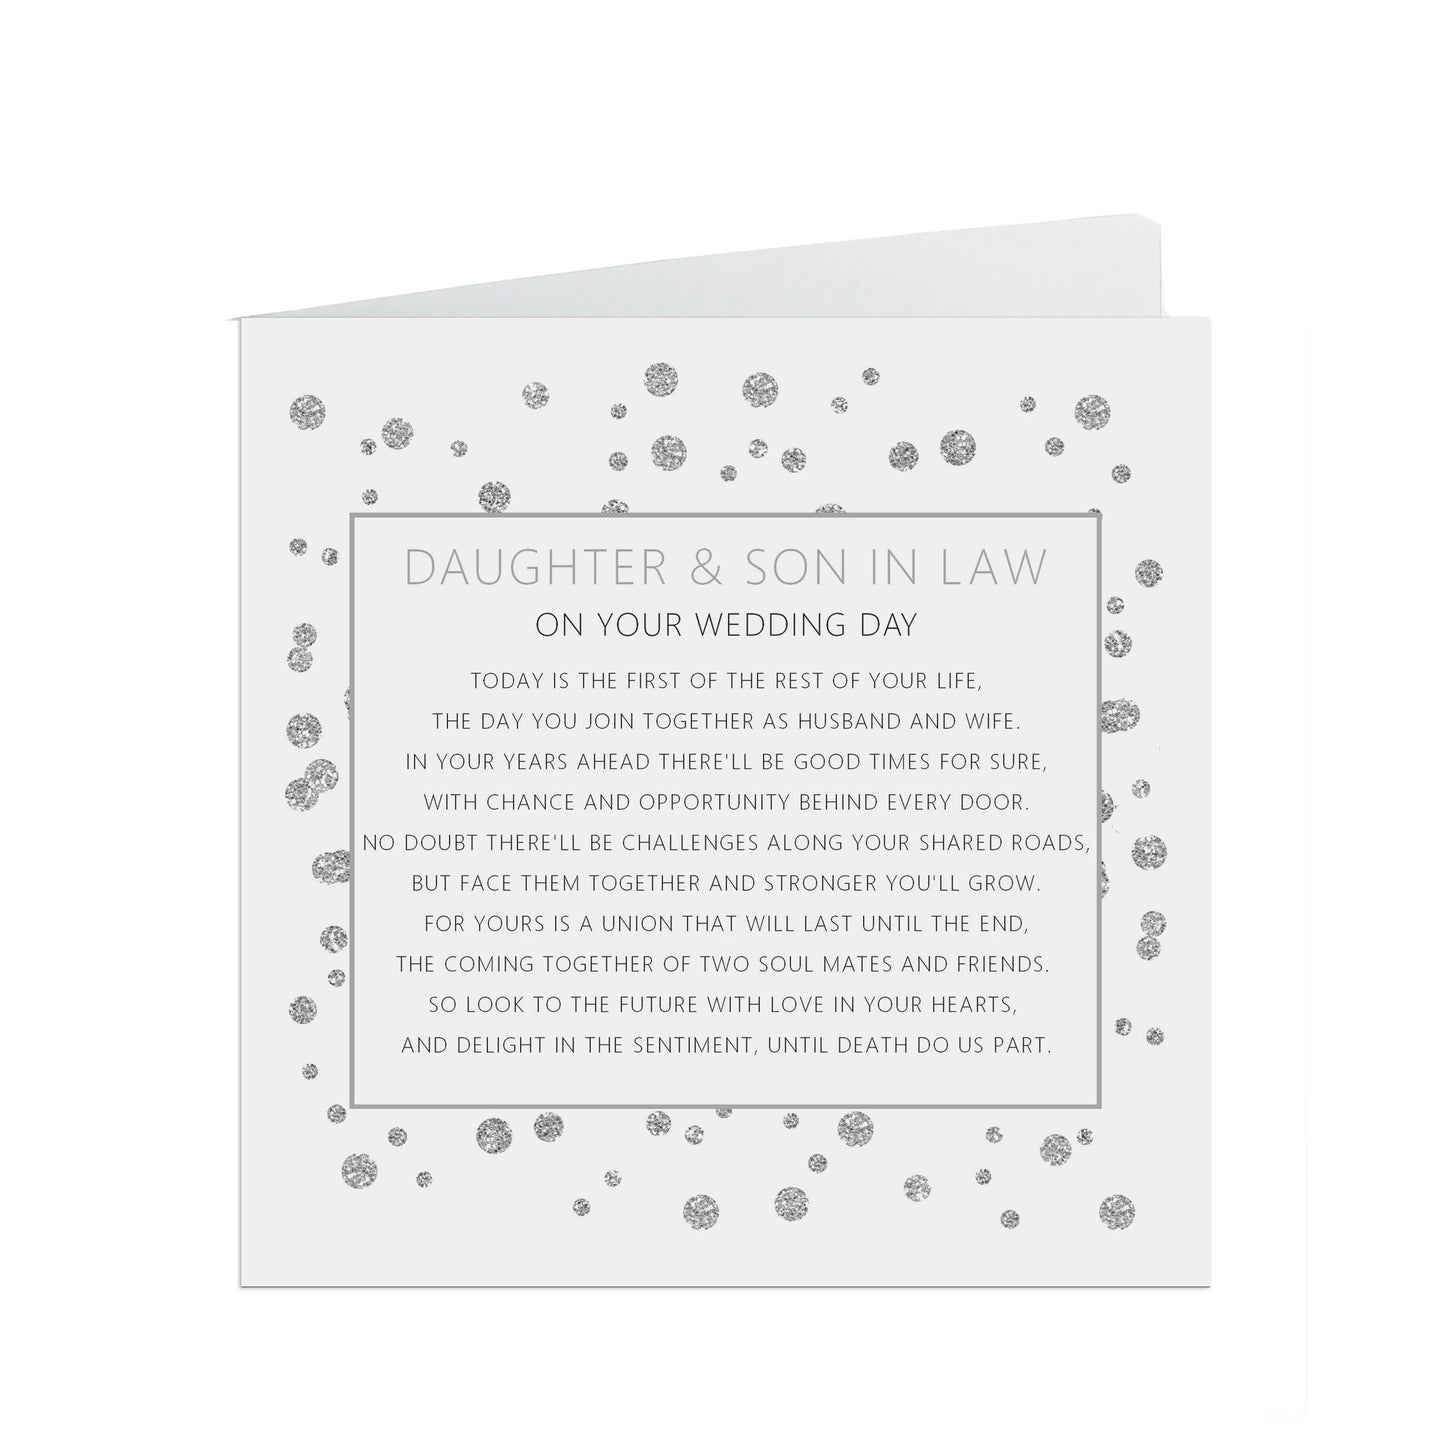 Daughter & Son In Law On Your Wedding Day Card, Silver Effect 6x6 Inches With A White Envelope